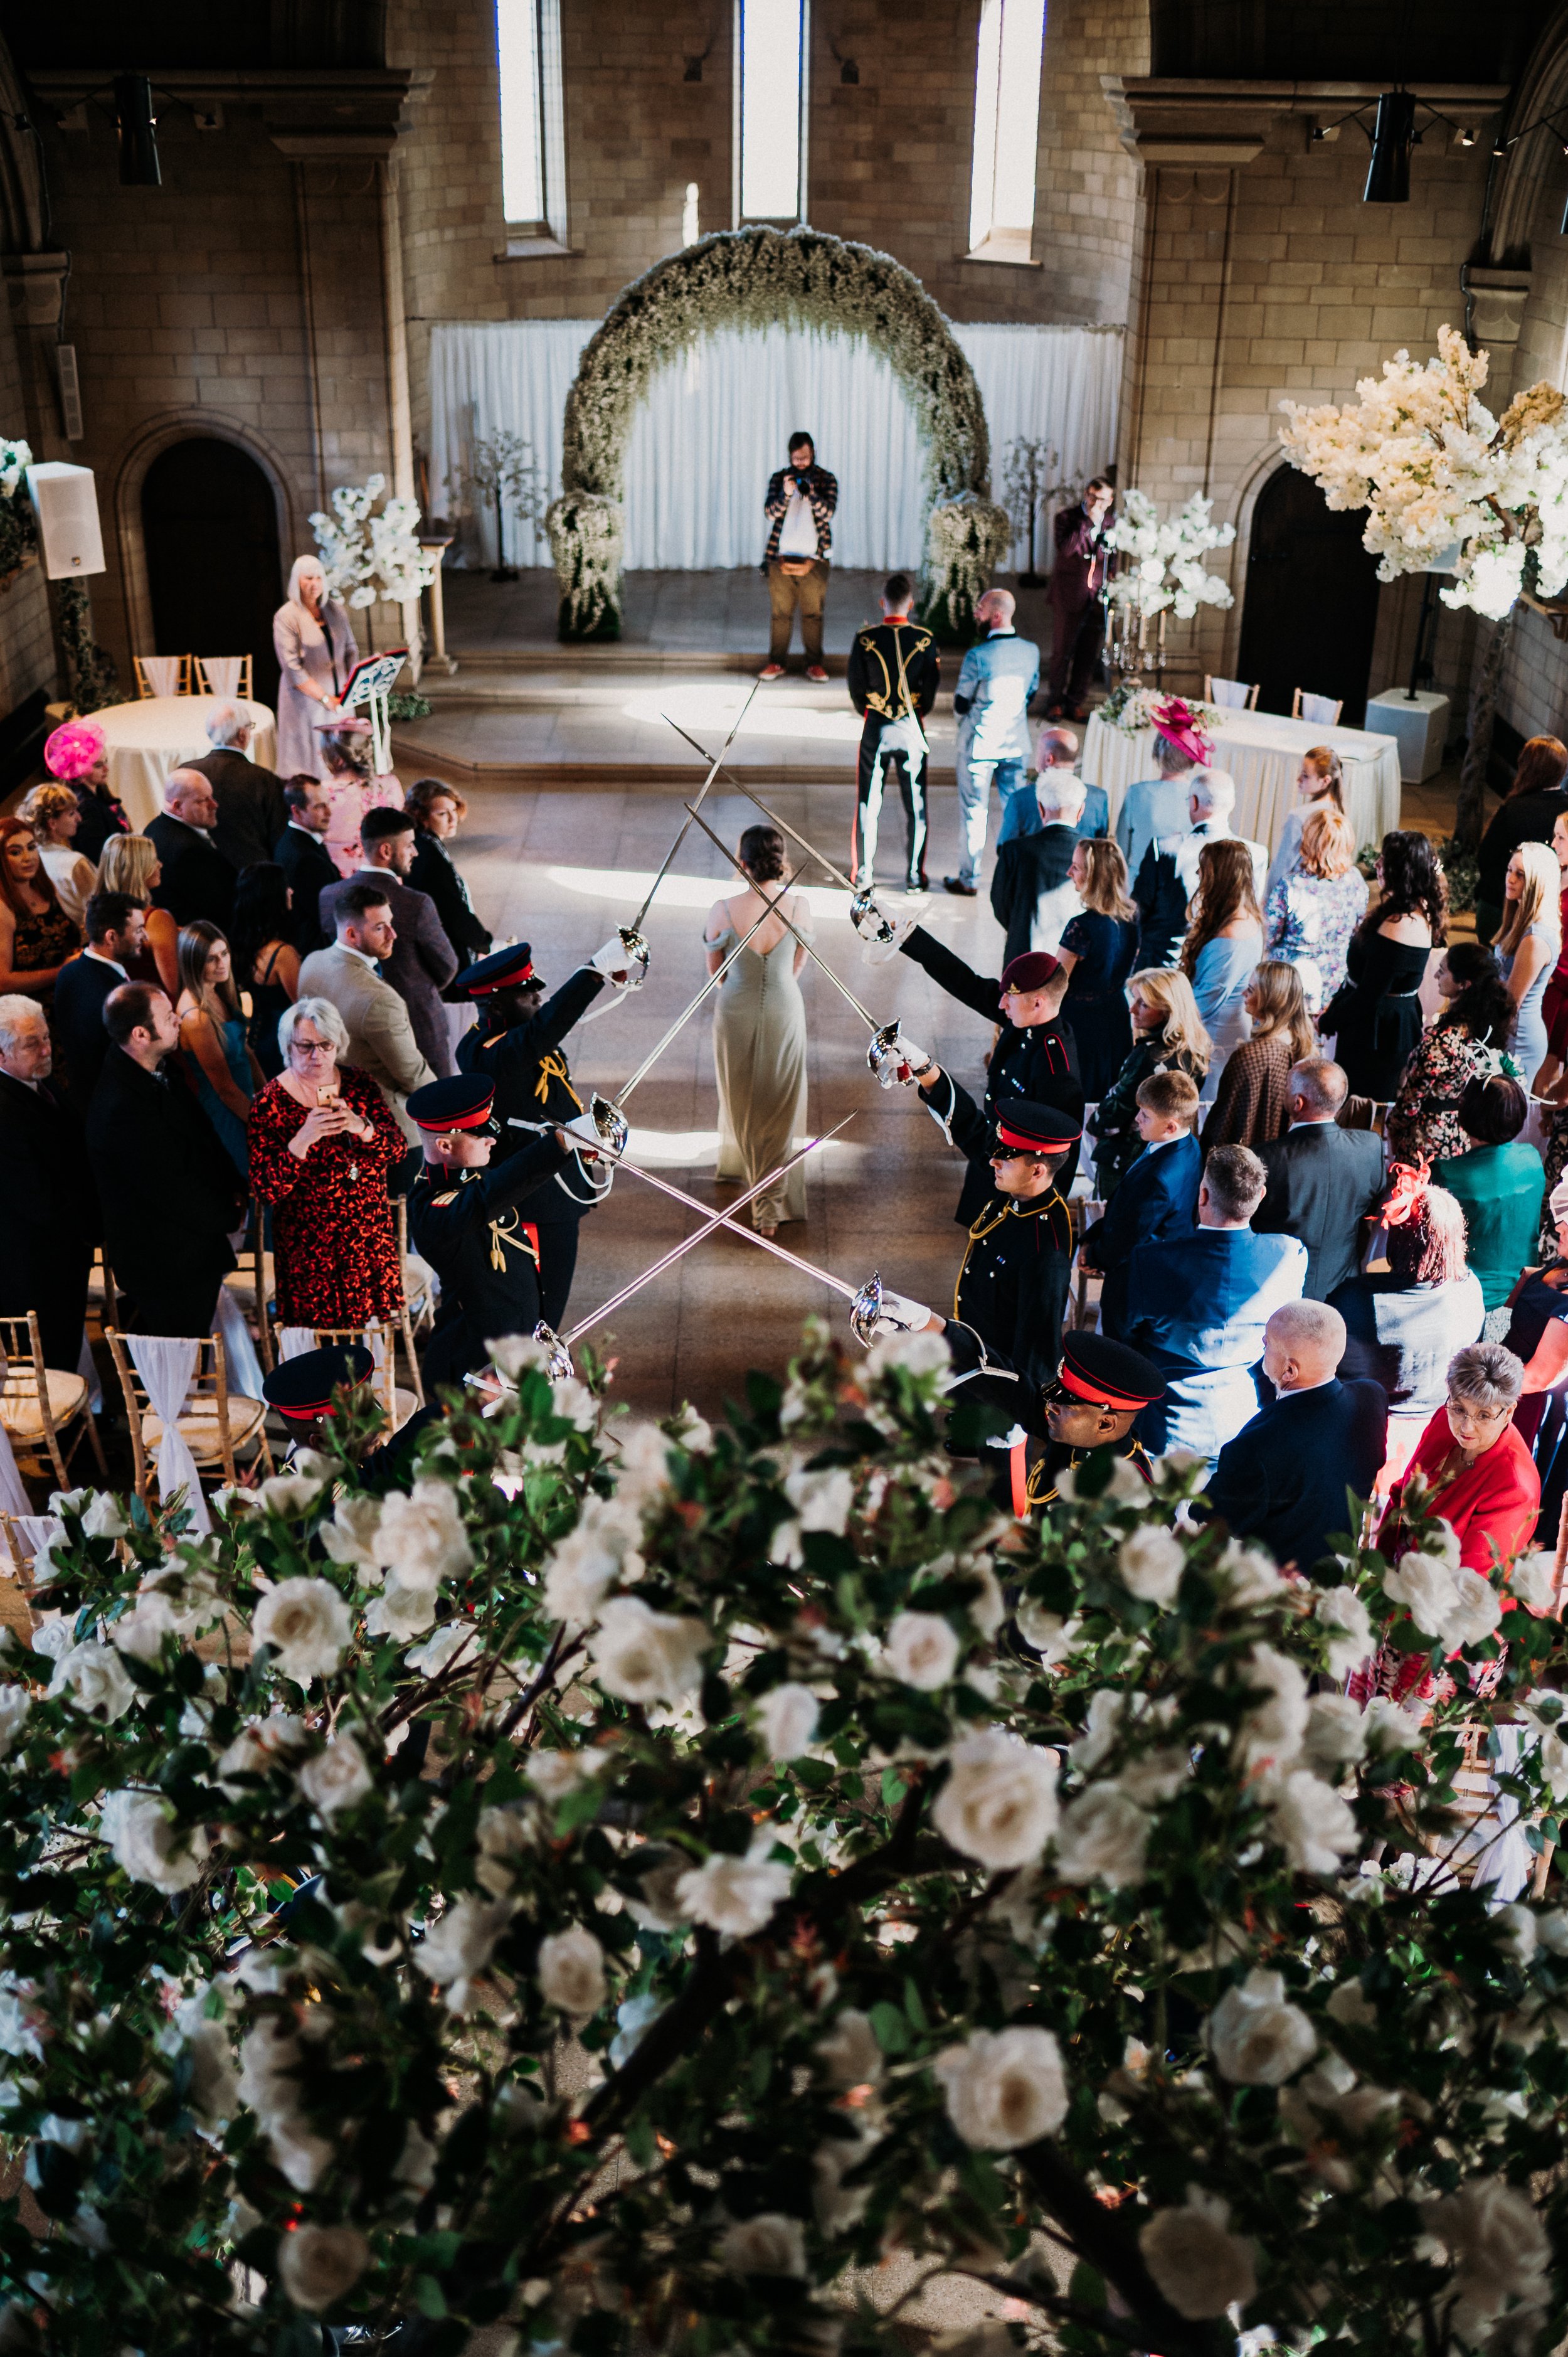 A bridesmaid walks into the ceremony room through the sword guard at Sneaton Castle, Whitby.